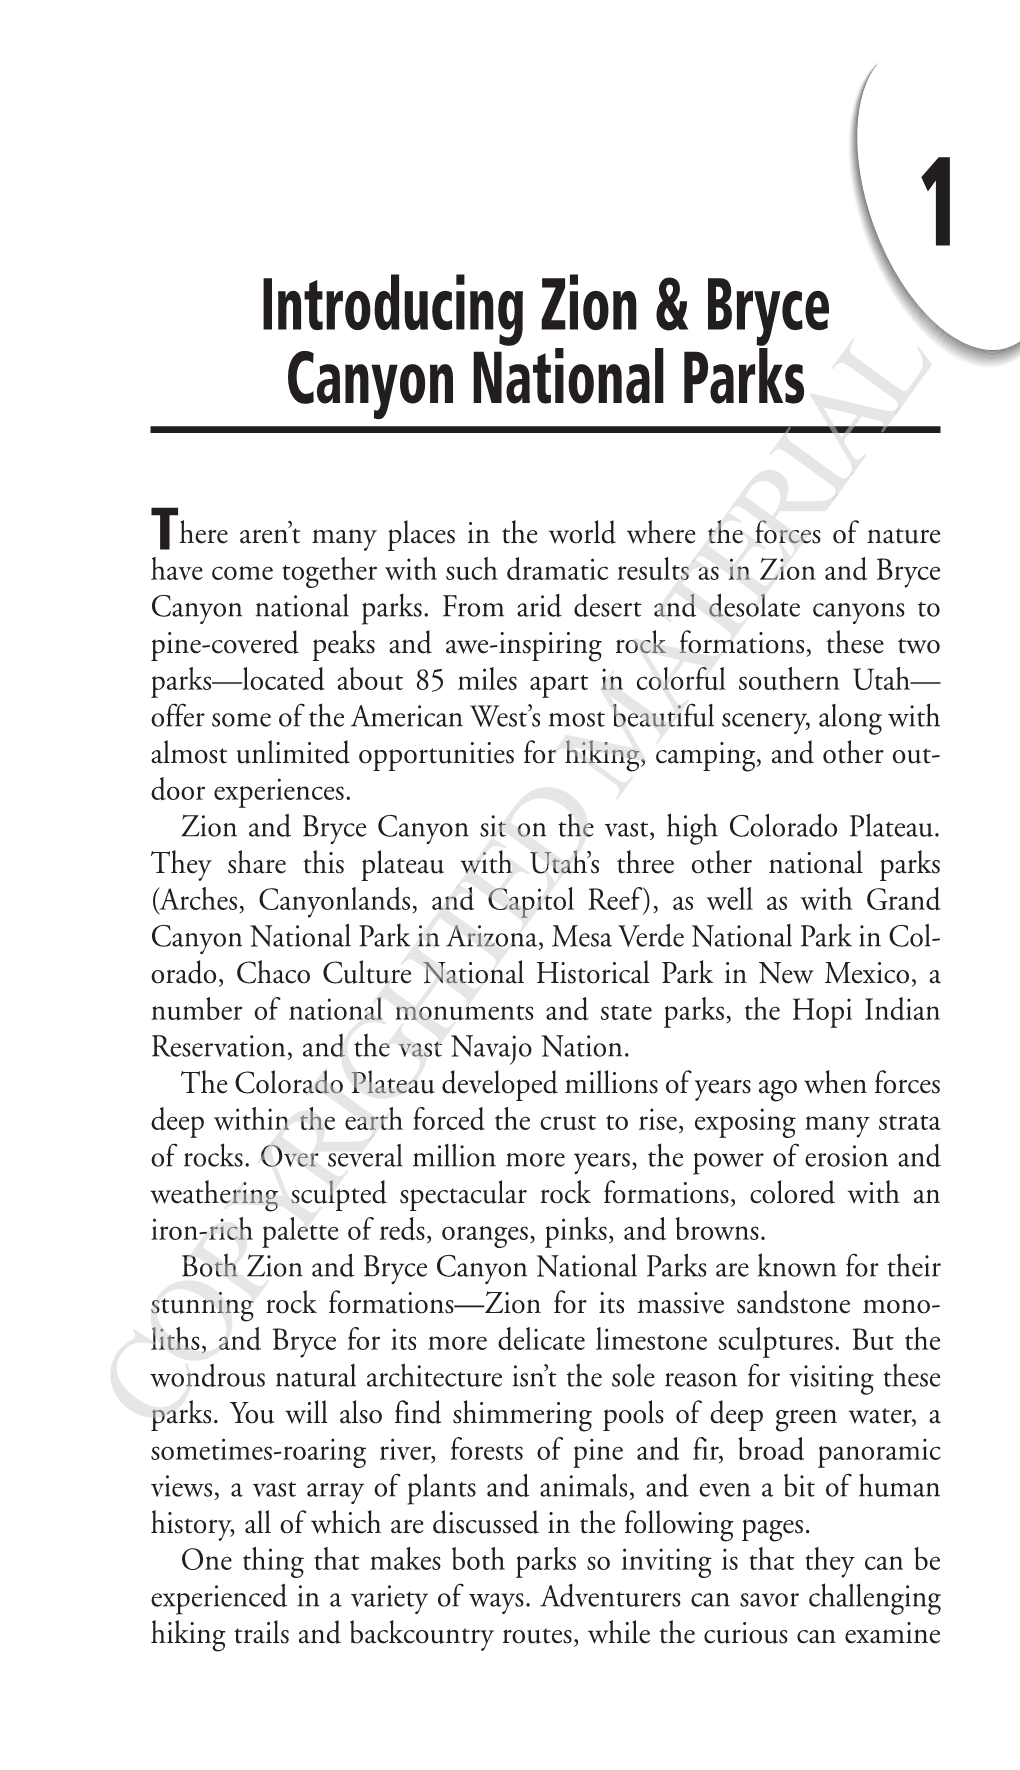 Introducing Zion & Bryce Canyon National Parks